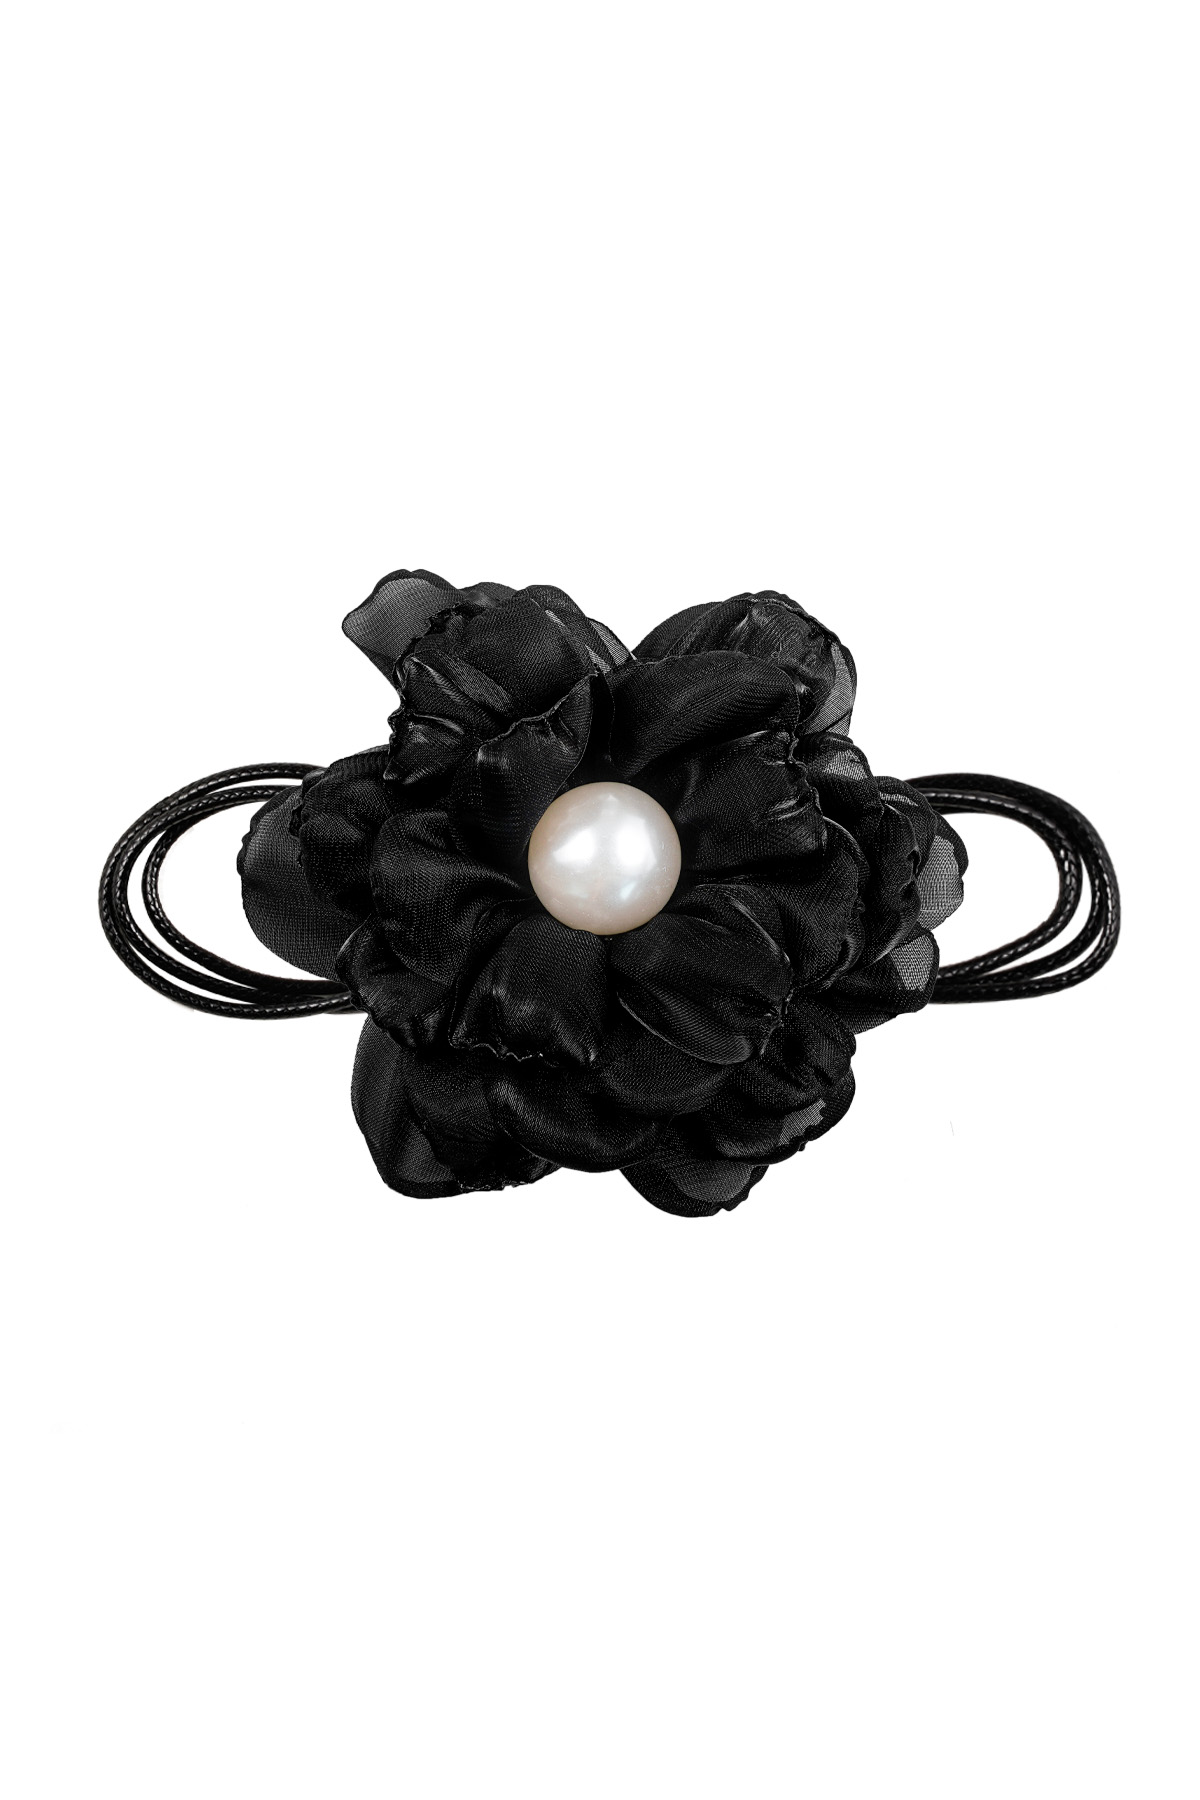 Chain rope with flower - black h5 